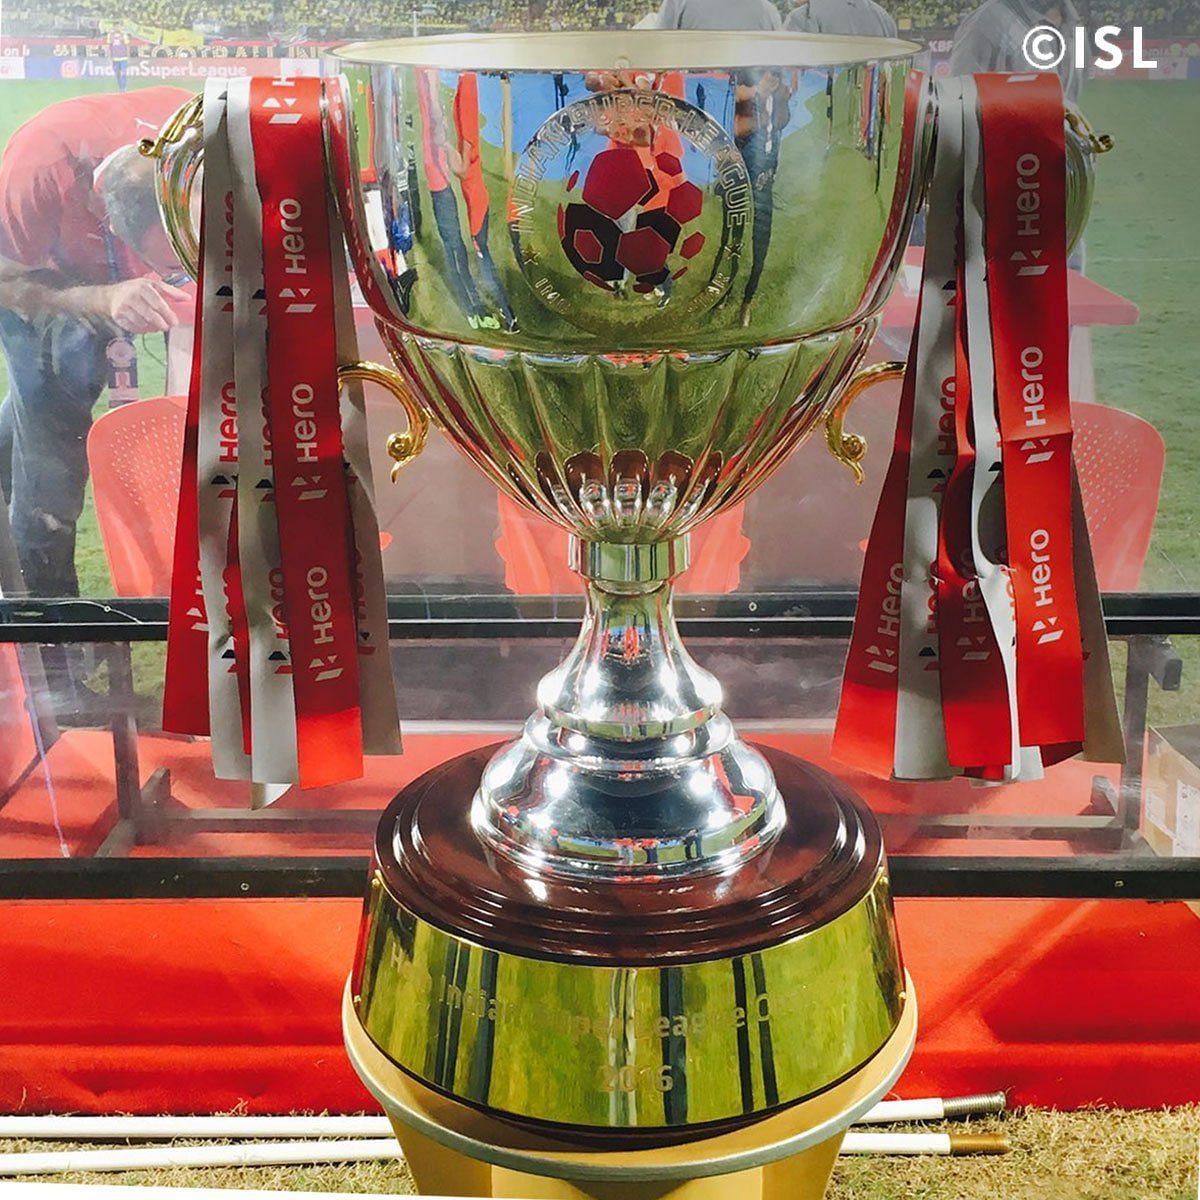 The trophy awarded to the winner of the 7th edition of the ISL (Image via IndSuperLeague/Twitter)